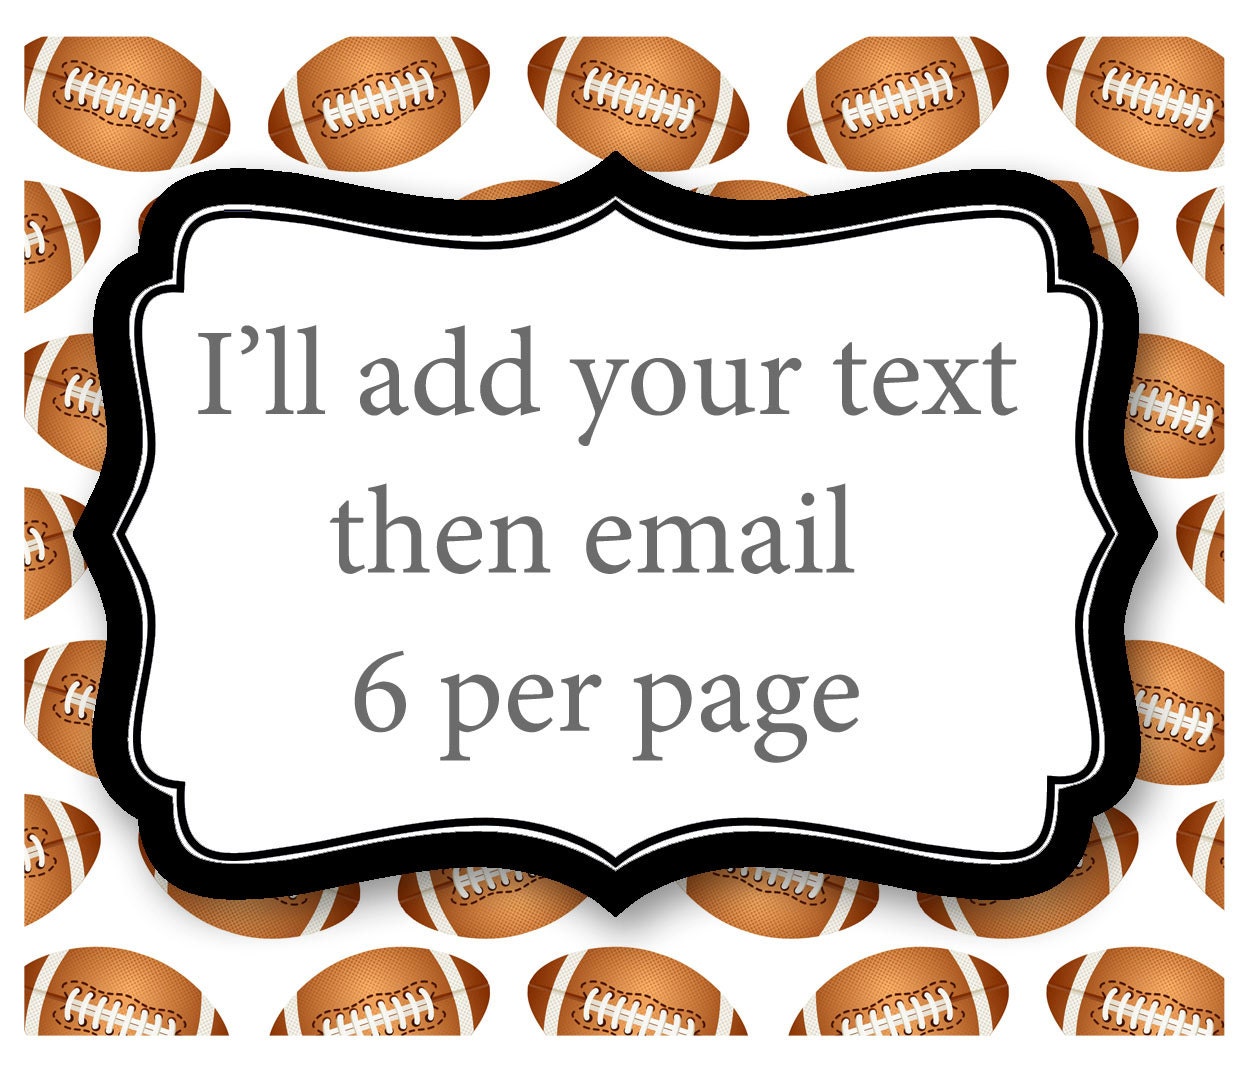 printable-football-tags-or-labels-i-ll-add-your-text-then